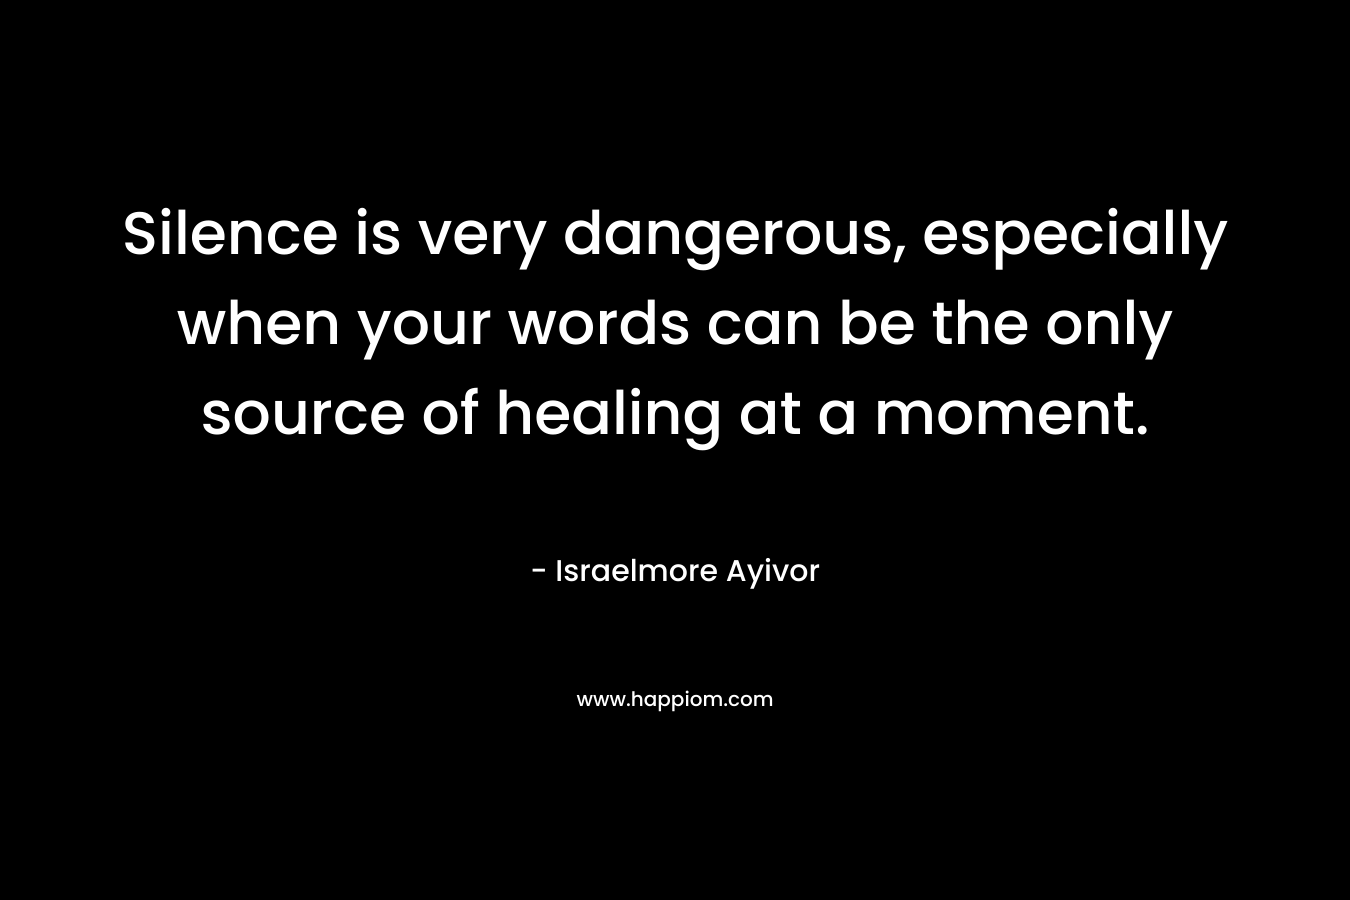 Silence is very dangerous, especially when your words can be the only source of healing at a moment.